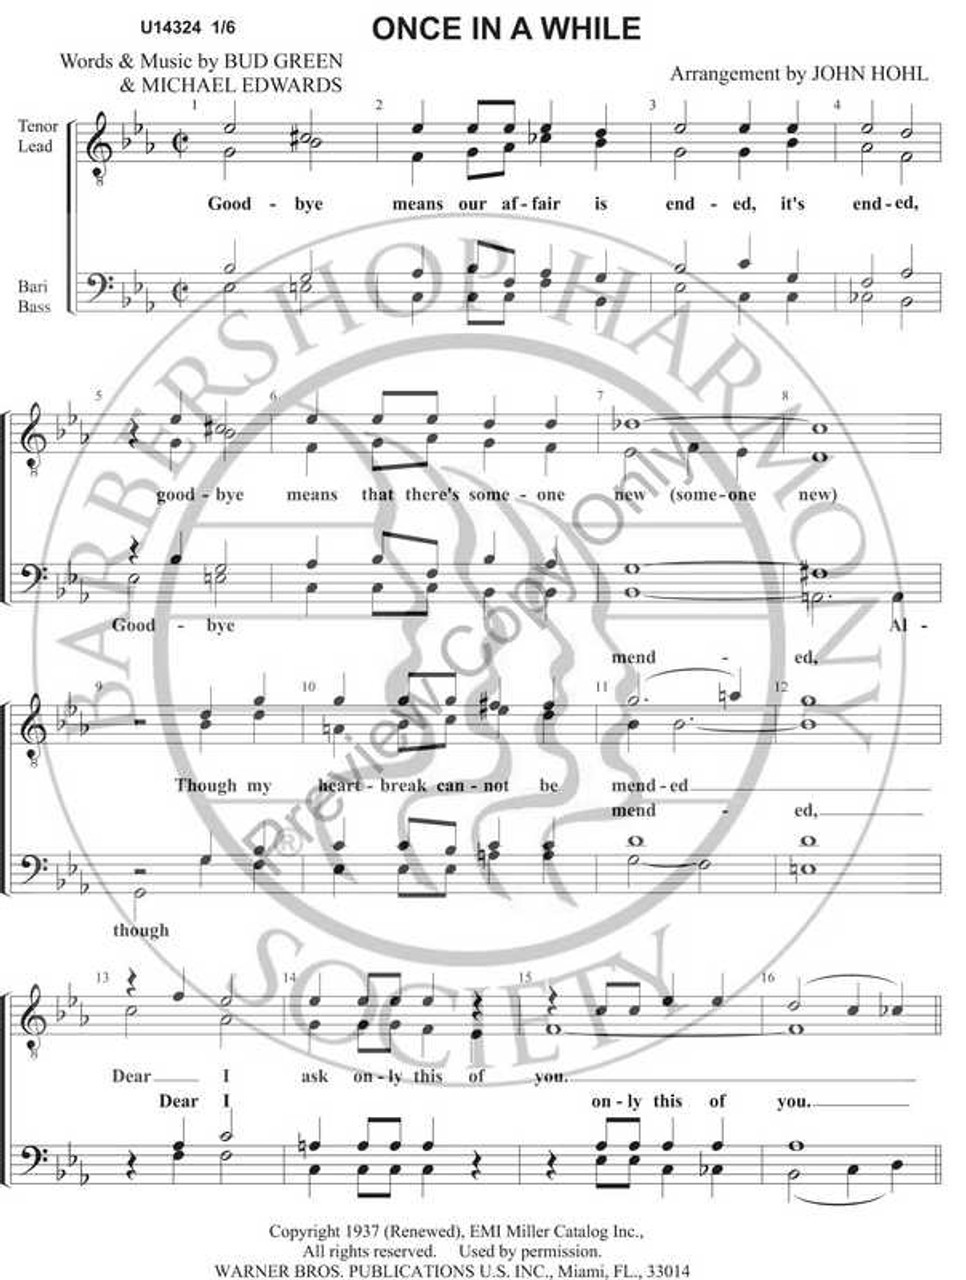 Once In A While 3 (TTBB) (arr. John Hohl)-UNPUB